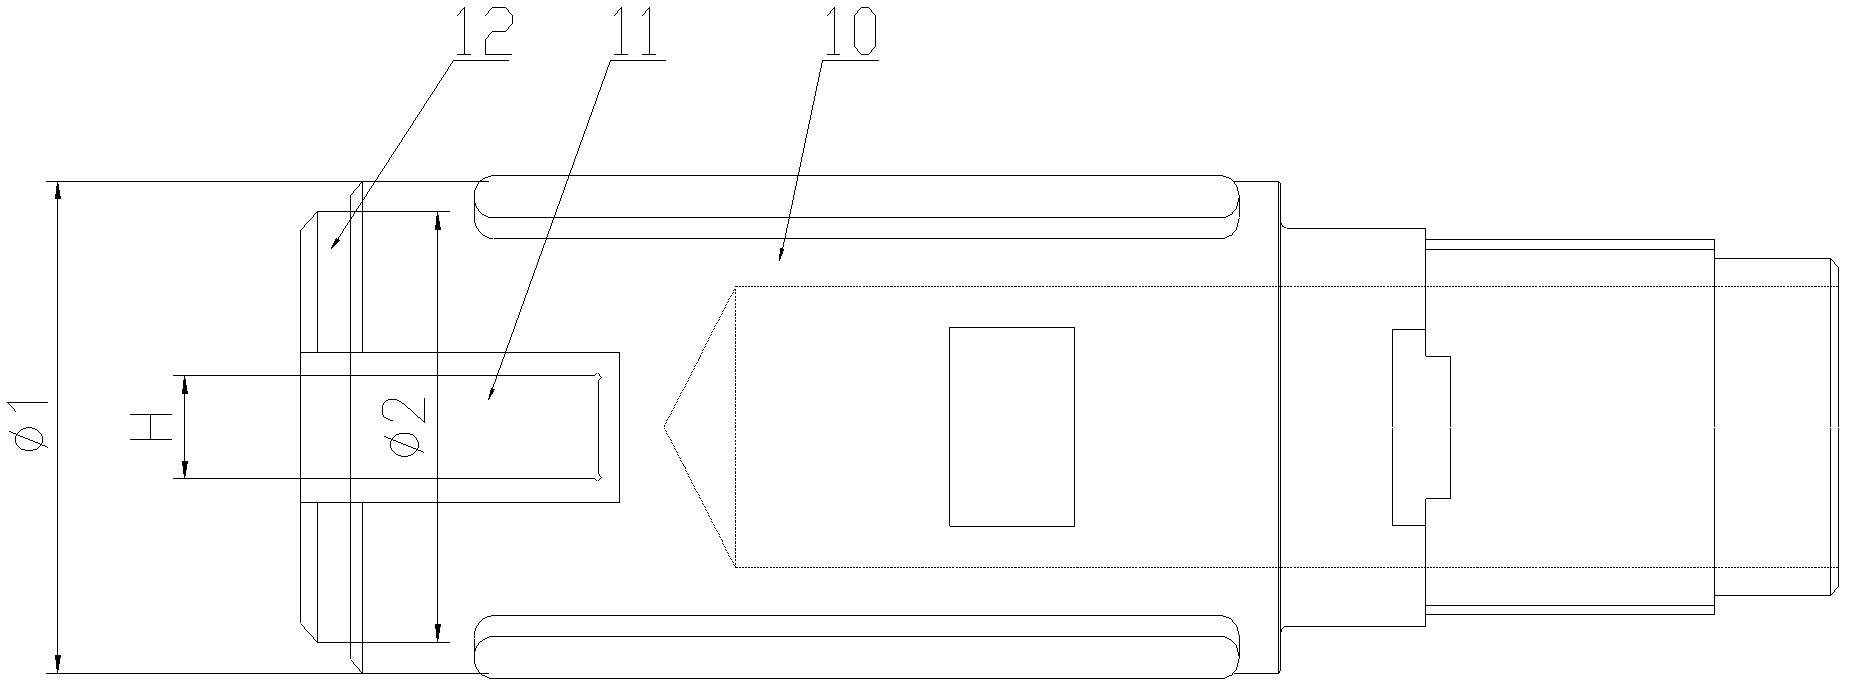 Machining method of circular transition section on bottom of central blind hole of generator rotor